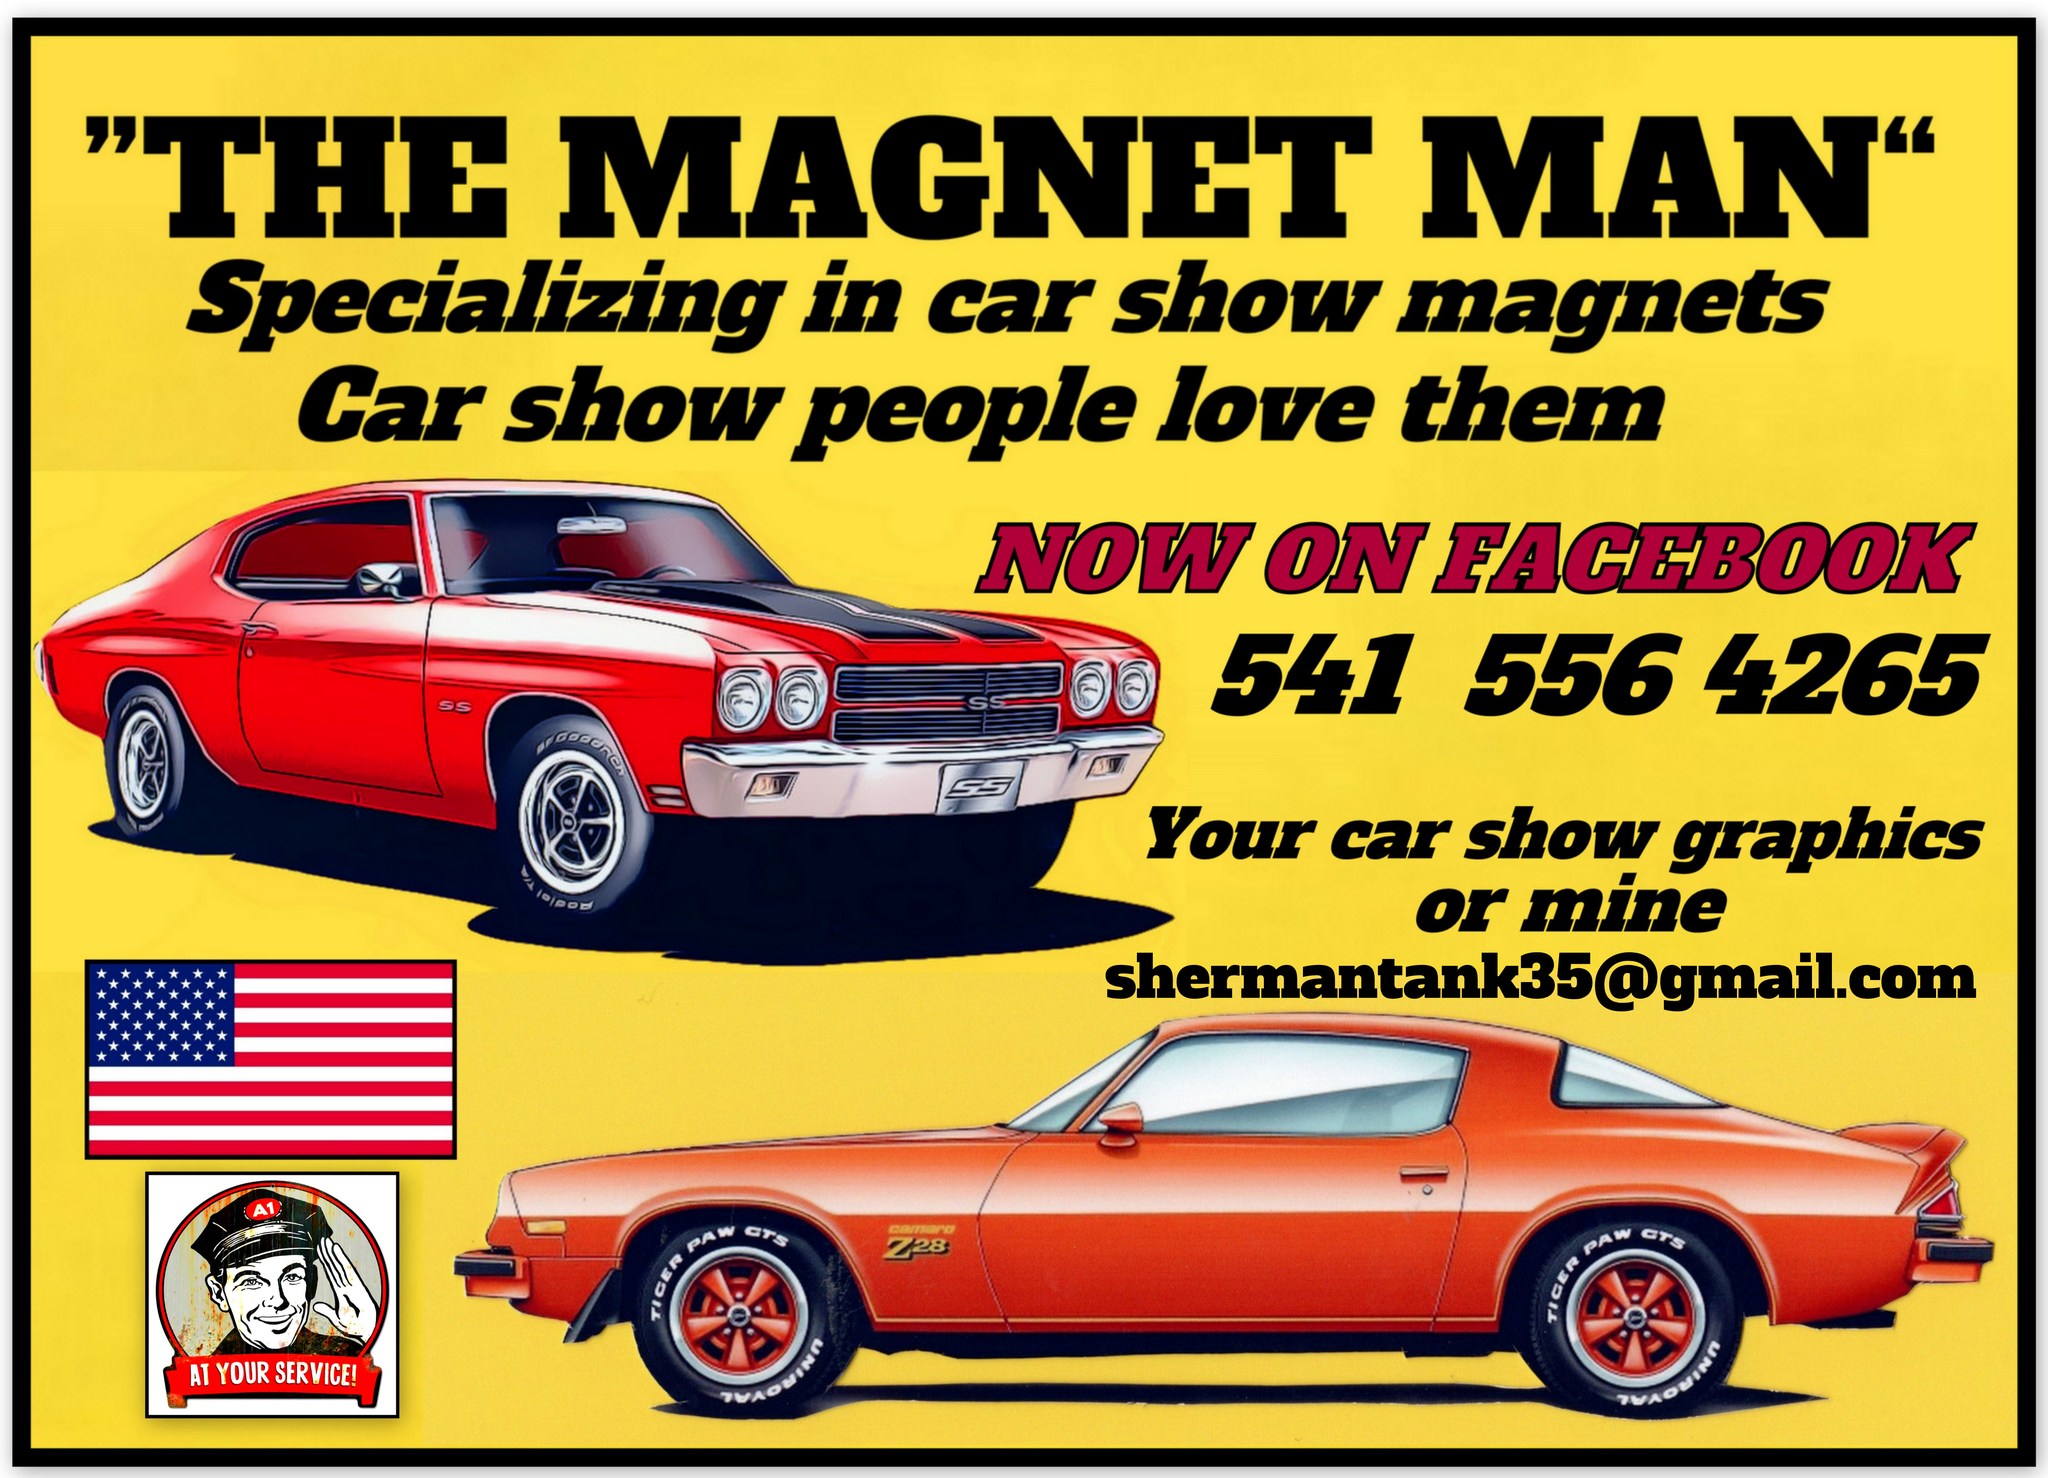 The Magnet Man